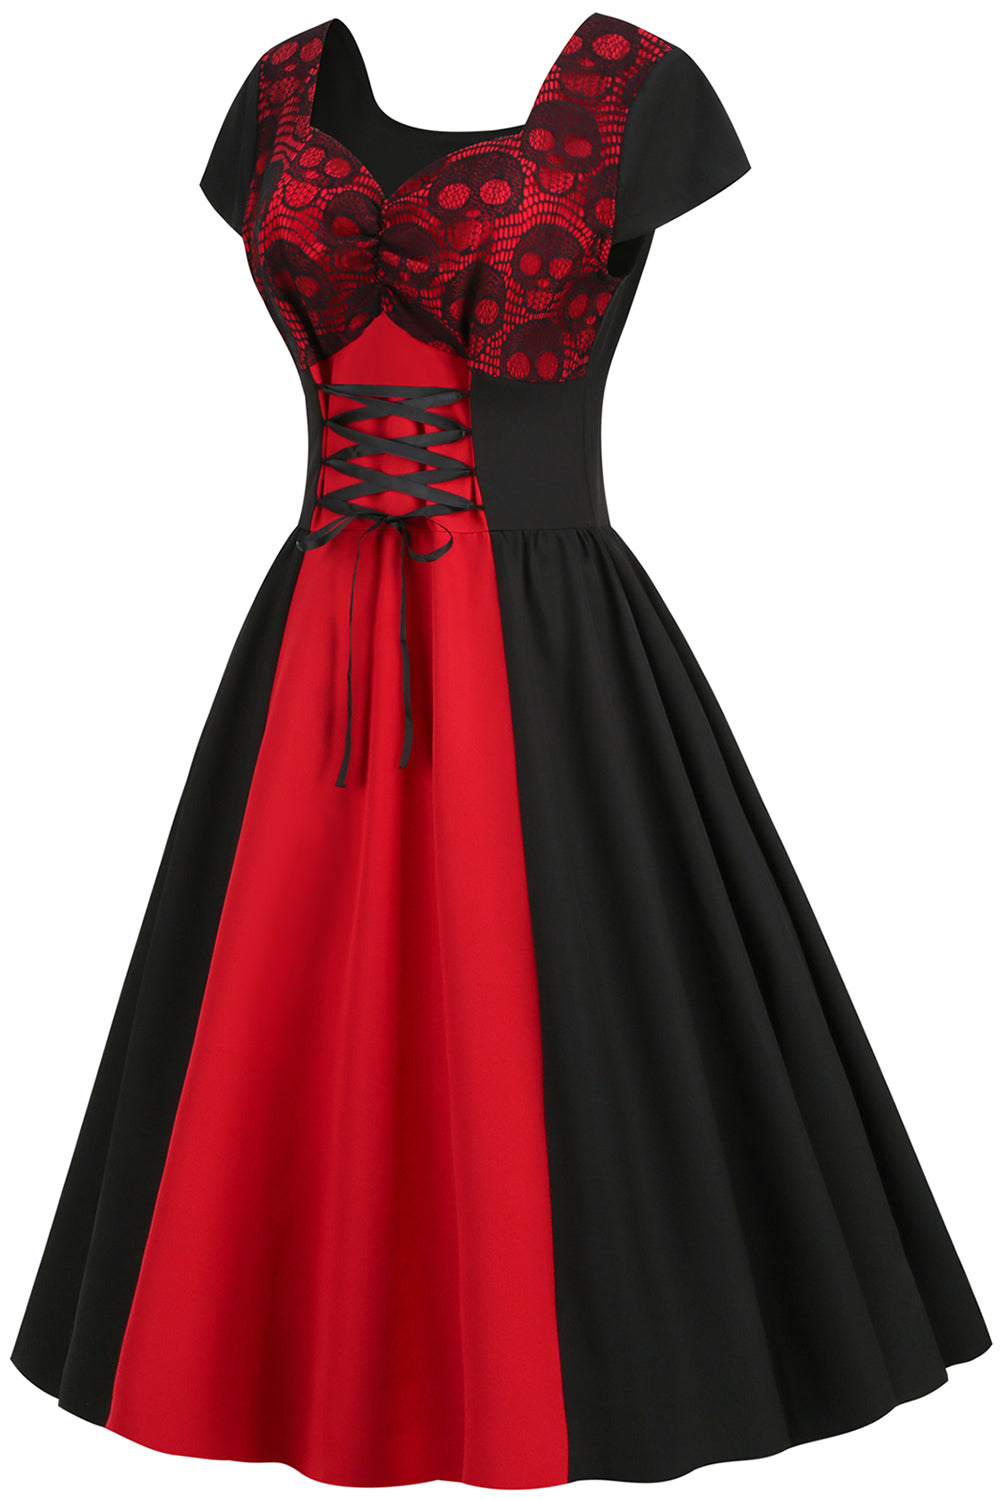 Black and Red Halloween Vintage 1950s Dress